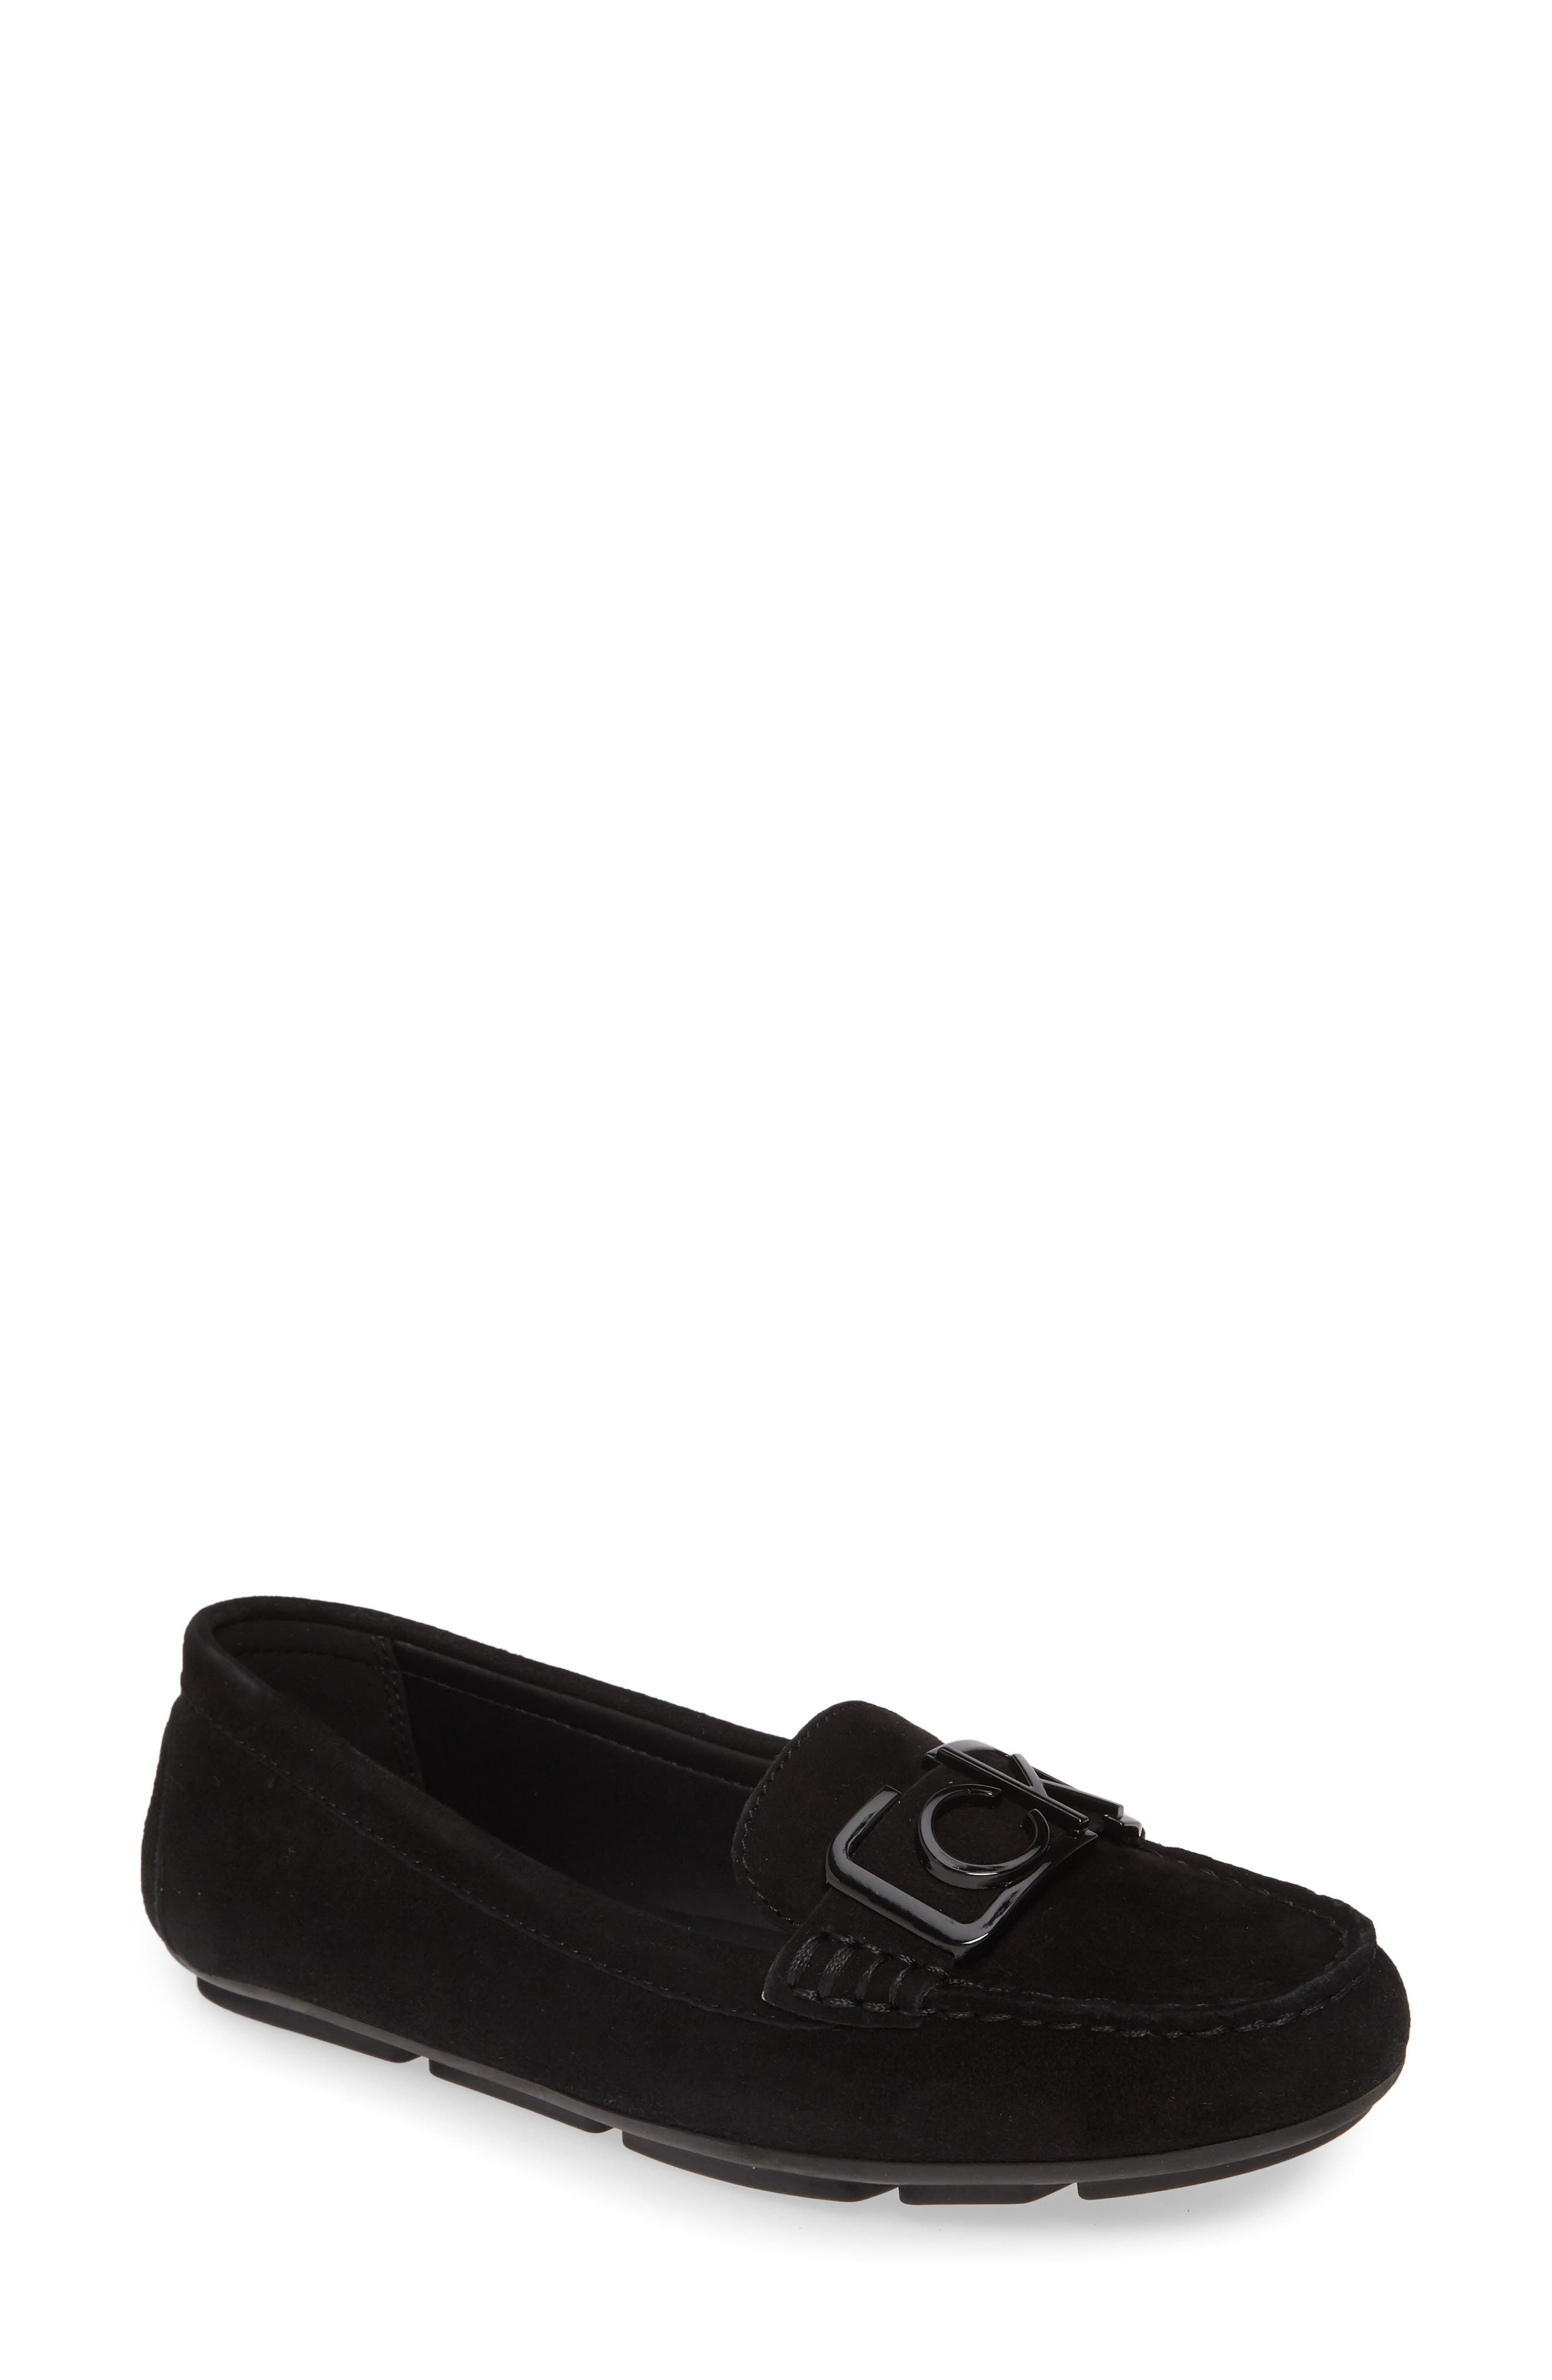 Calvin Klein | Ladeca Suede Loafer 